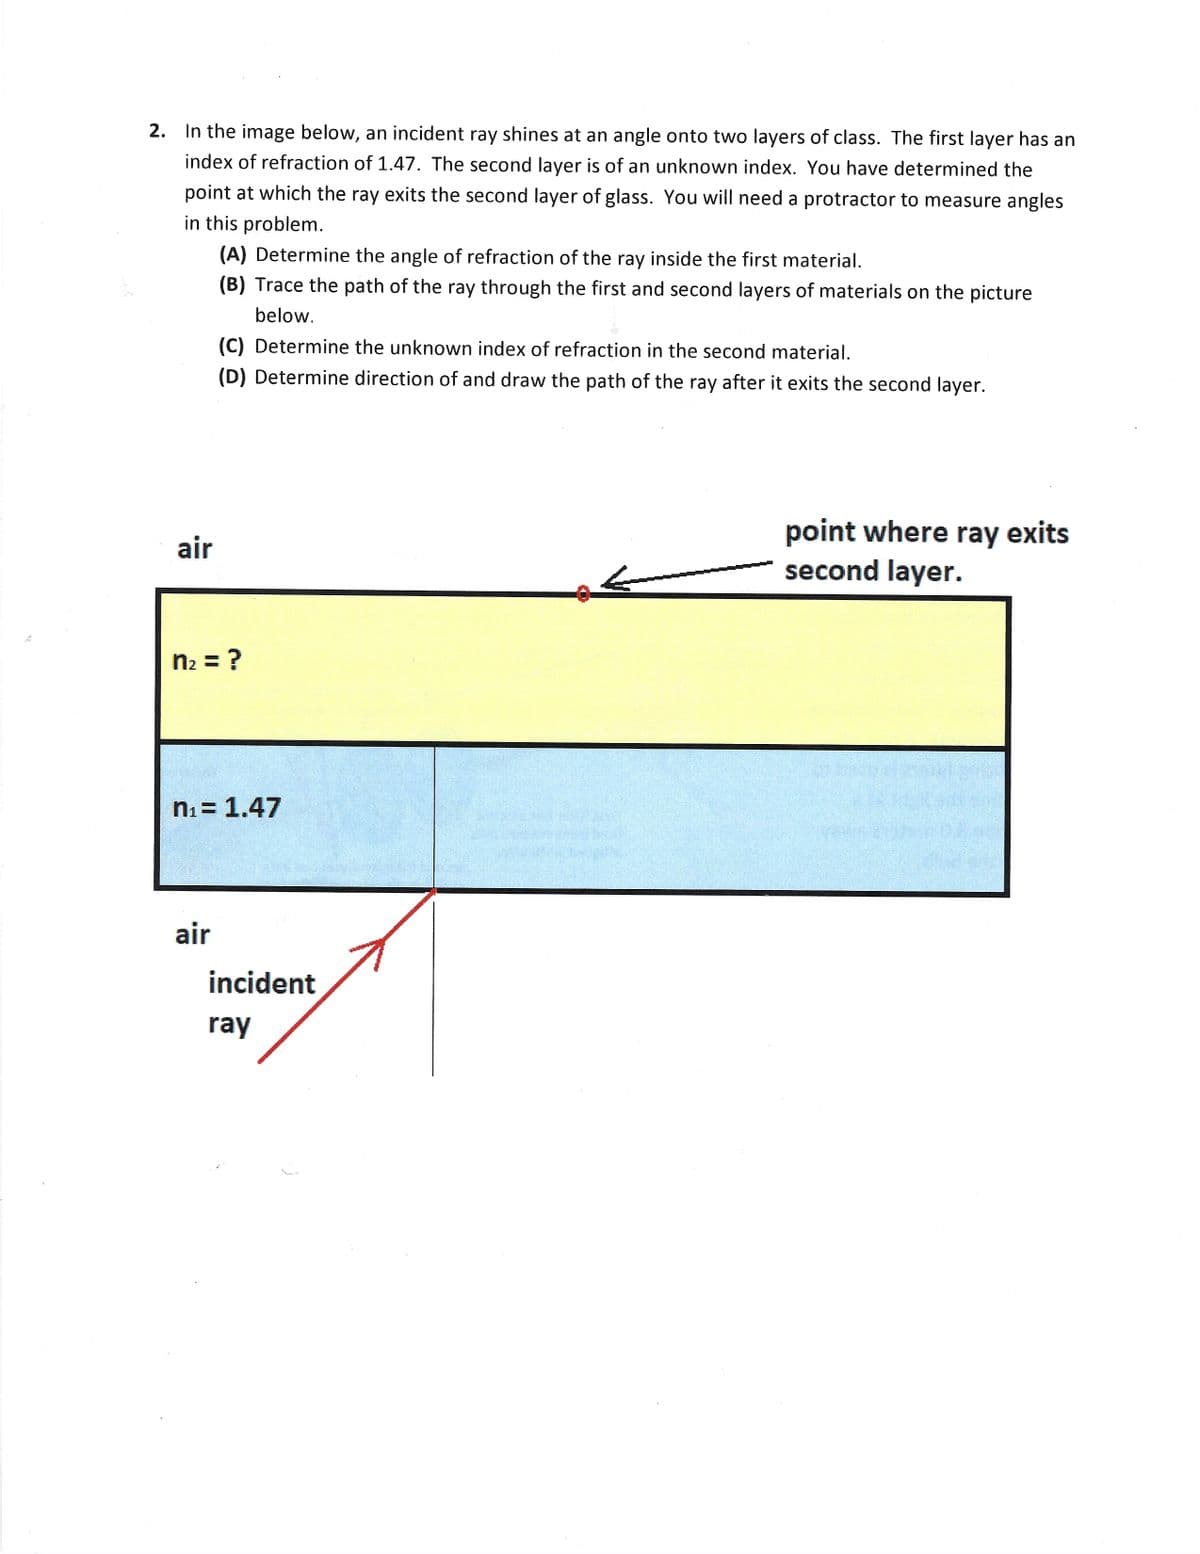 2. In the image below, an incident ray shines at an angle onto two layers of class. The first layer has an
index of refraction of 1.47. The second layer is of an unknown index. You have determined the
point at which the ray exits the second layer of glass. You will need a protractor to measure angles
in this problem.
(A) Determine the angle of refraction of the ray inside the first material.
(B) Trace the path of the ray through the first and second layers of materials on the picture
below.
(C) Determine the unknown index of refraction in the second material.
(D) Determine direction of and draw the path of the ray after it exits the second layer.
point where ray exits
second layer.
air
n2 = ?
ni = 1.47
air
incident
ray
